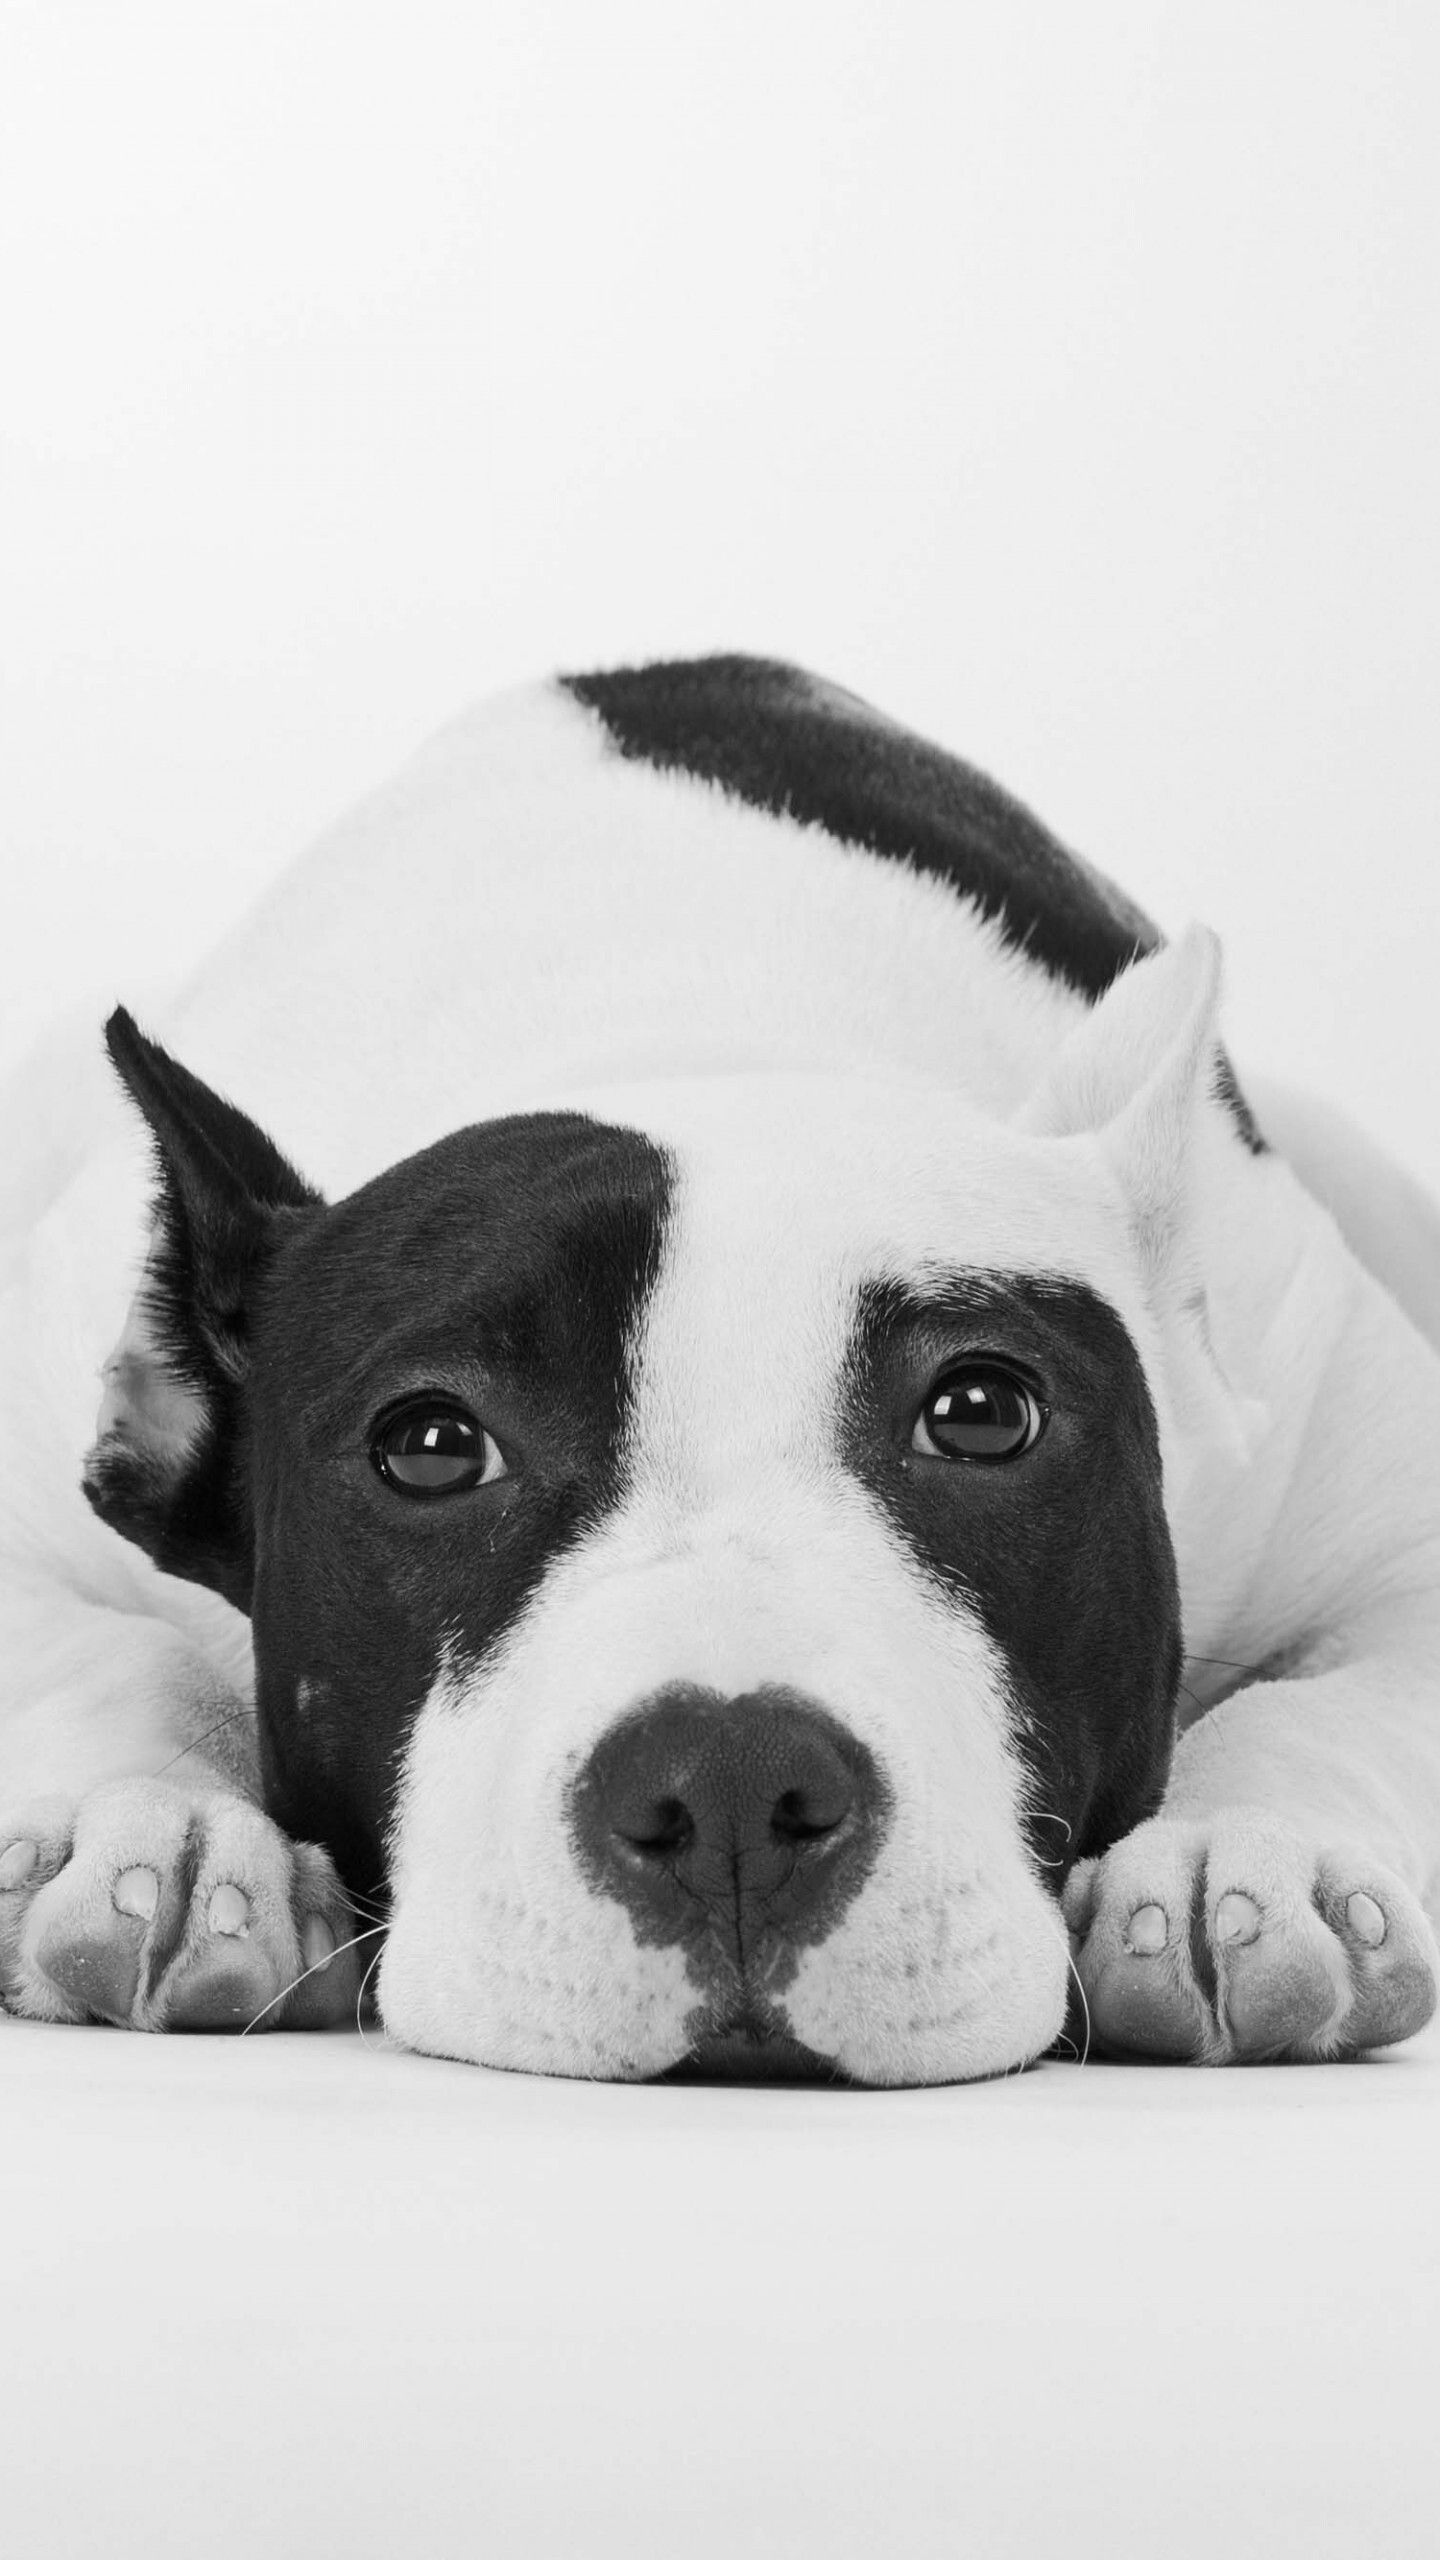 Black And White Dogs Wallpapers - Wallpaper Cave